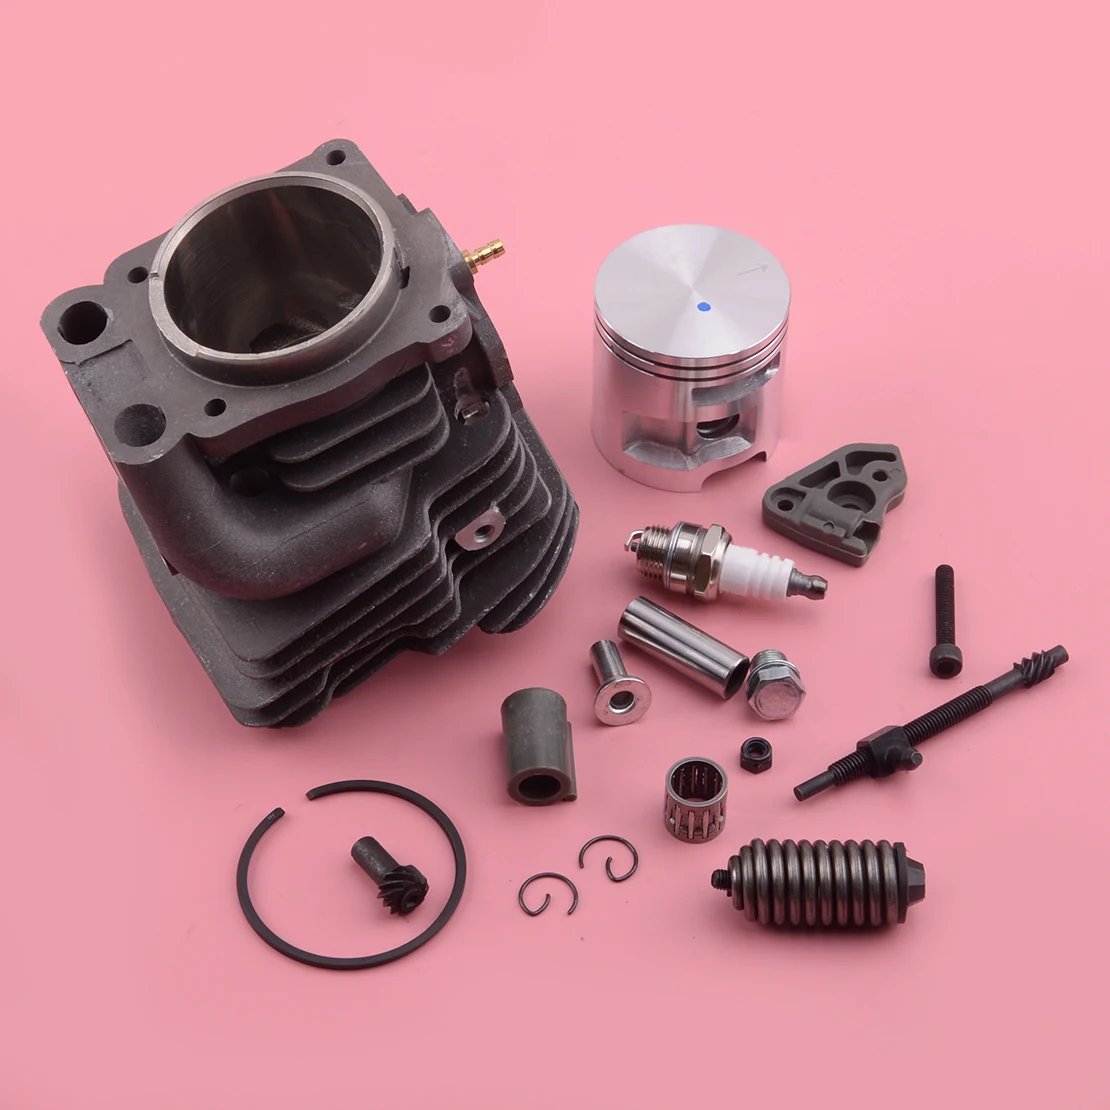 51mm 537254102 Cylinder Piston Kit Replacement Fit for Husqvarna 575 575XP 570 Chainsaw Adjuster